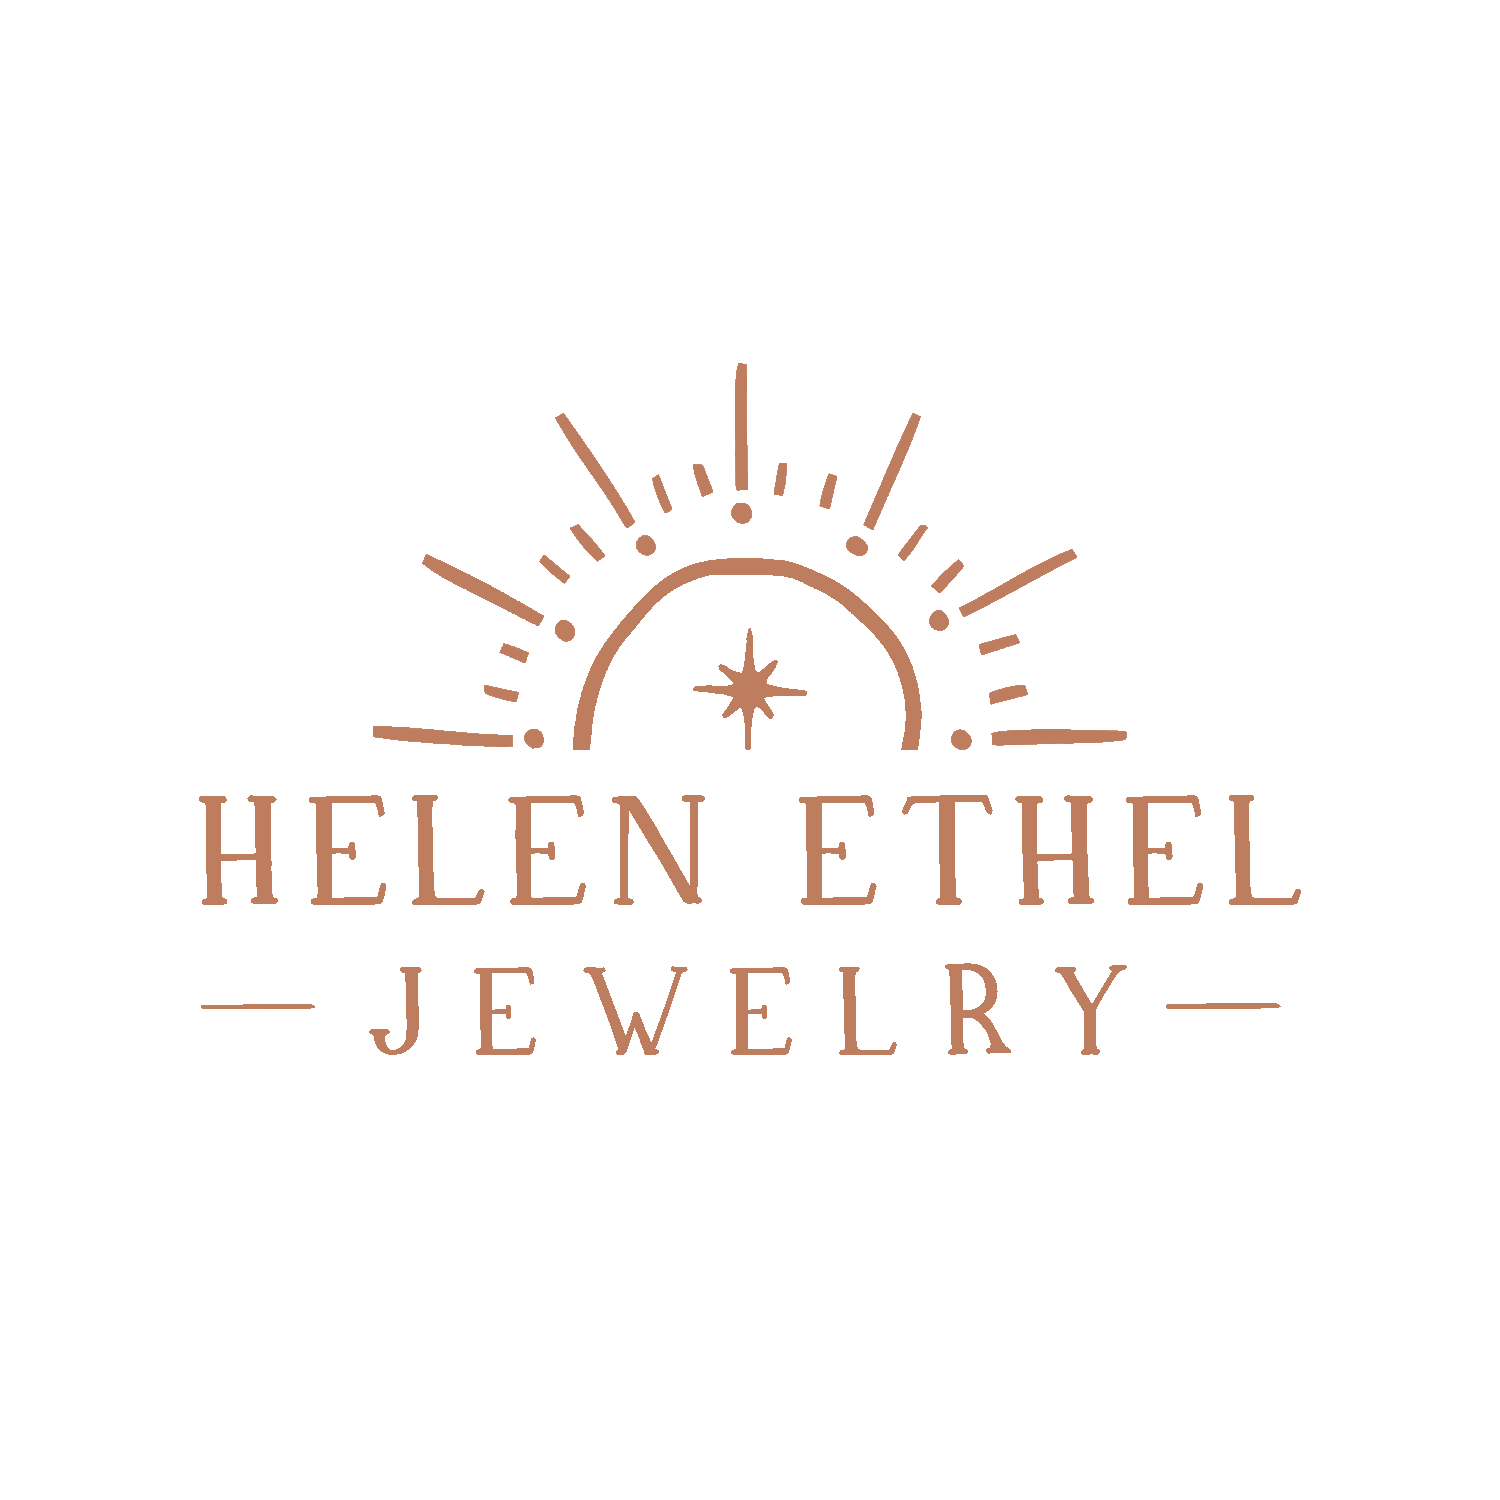 Helen Ethel Jewelry - Artisan Jewelry, Consciously Crafted